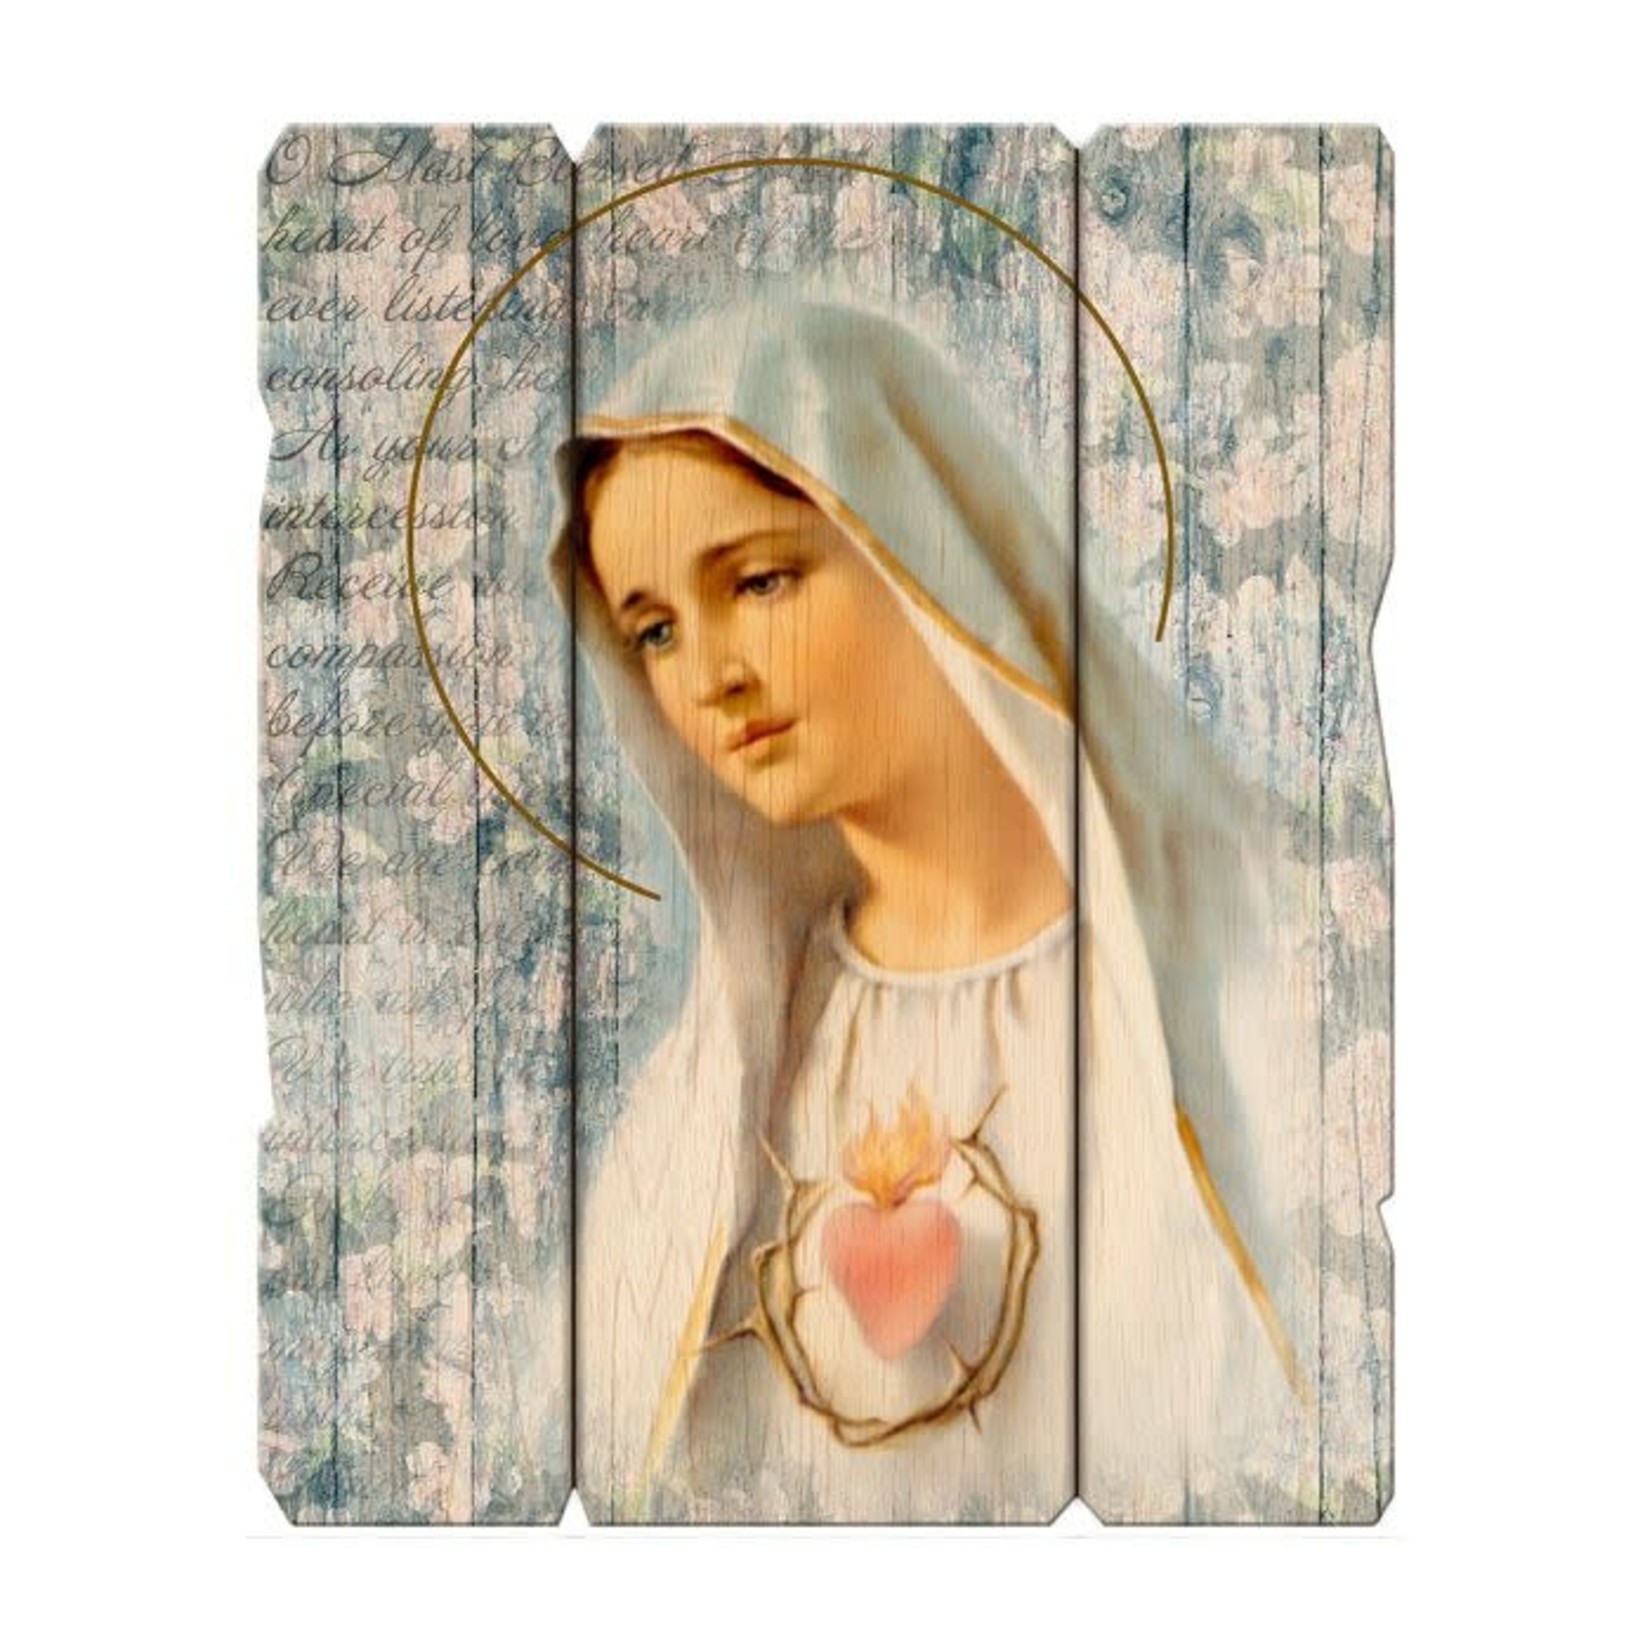 Our Lady of Fatima with Immaculate Heart Wood Plaque